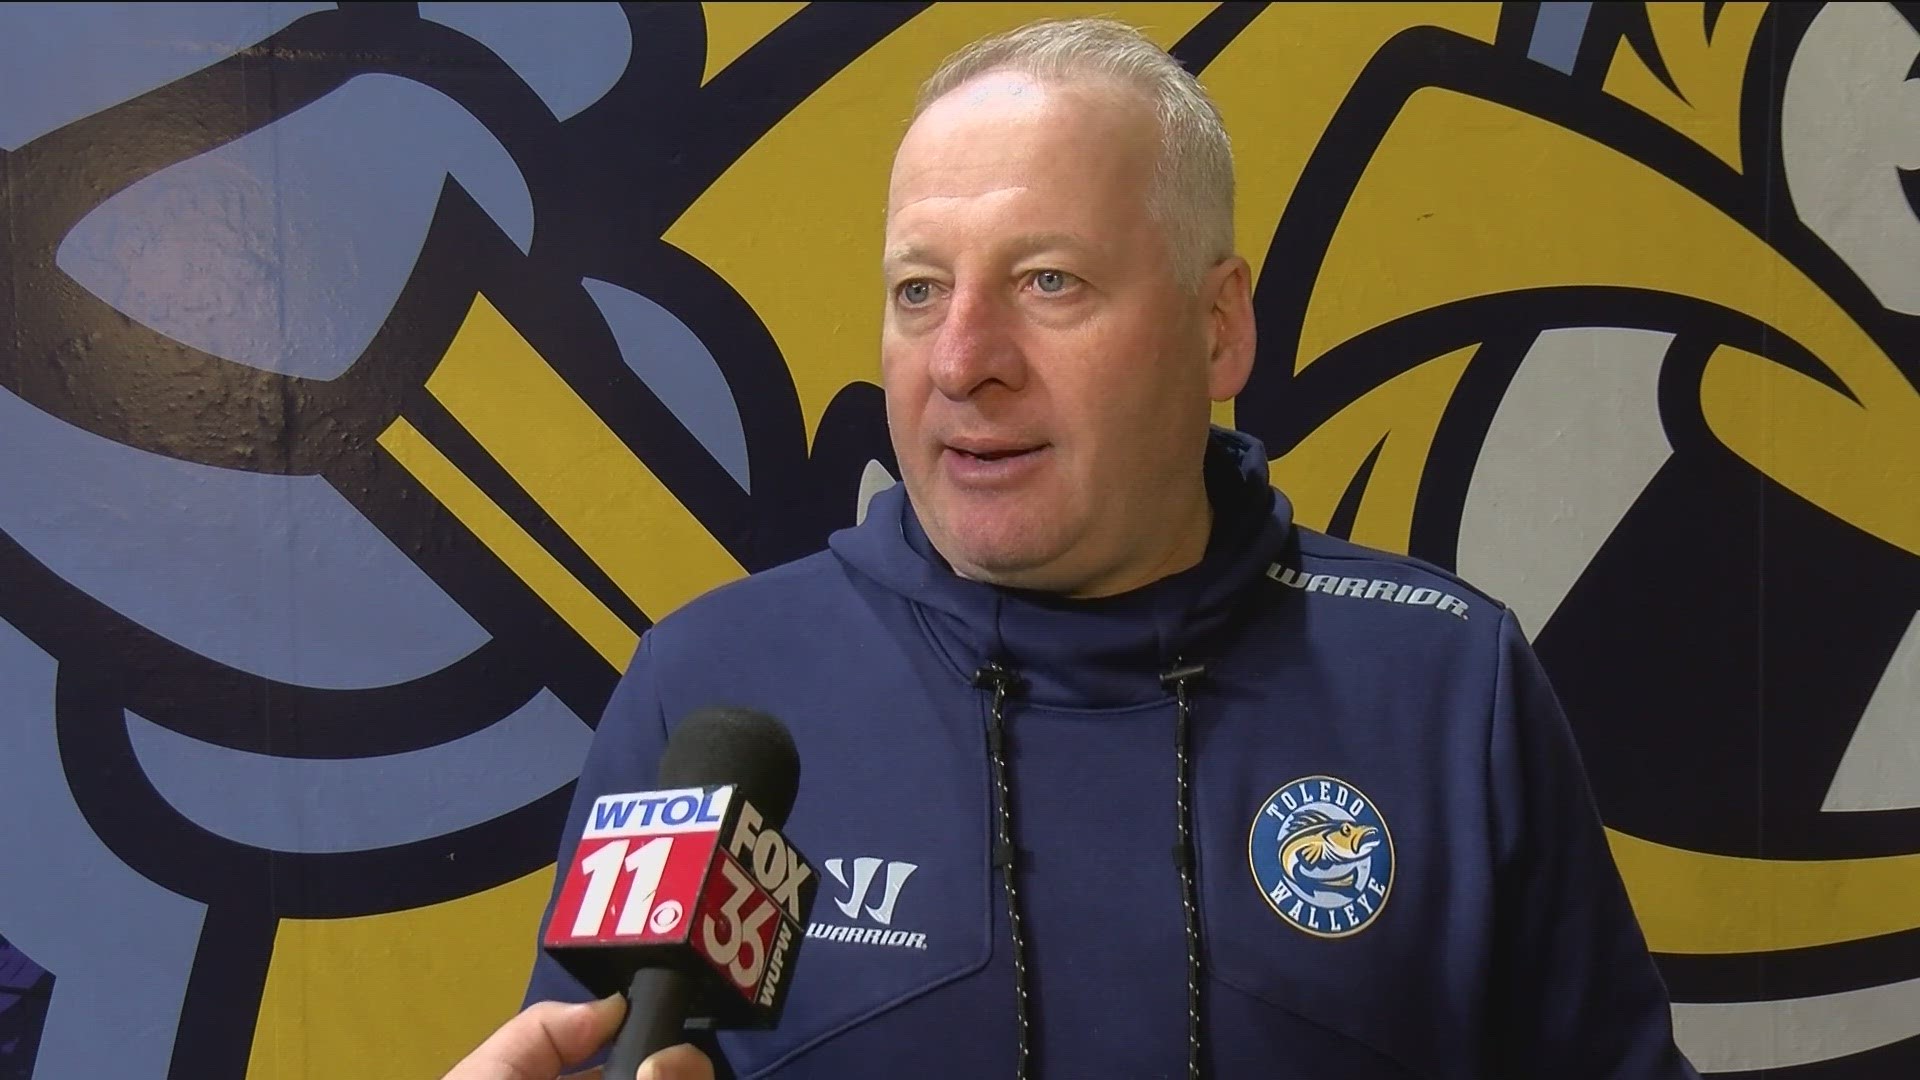 With a new face behind the bench in head coach Pat Mikesch and only a handful of returning players on the ice, the Walleye will be a largely different team this year